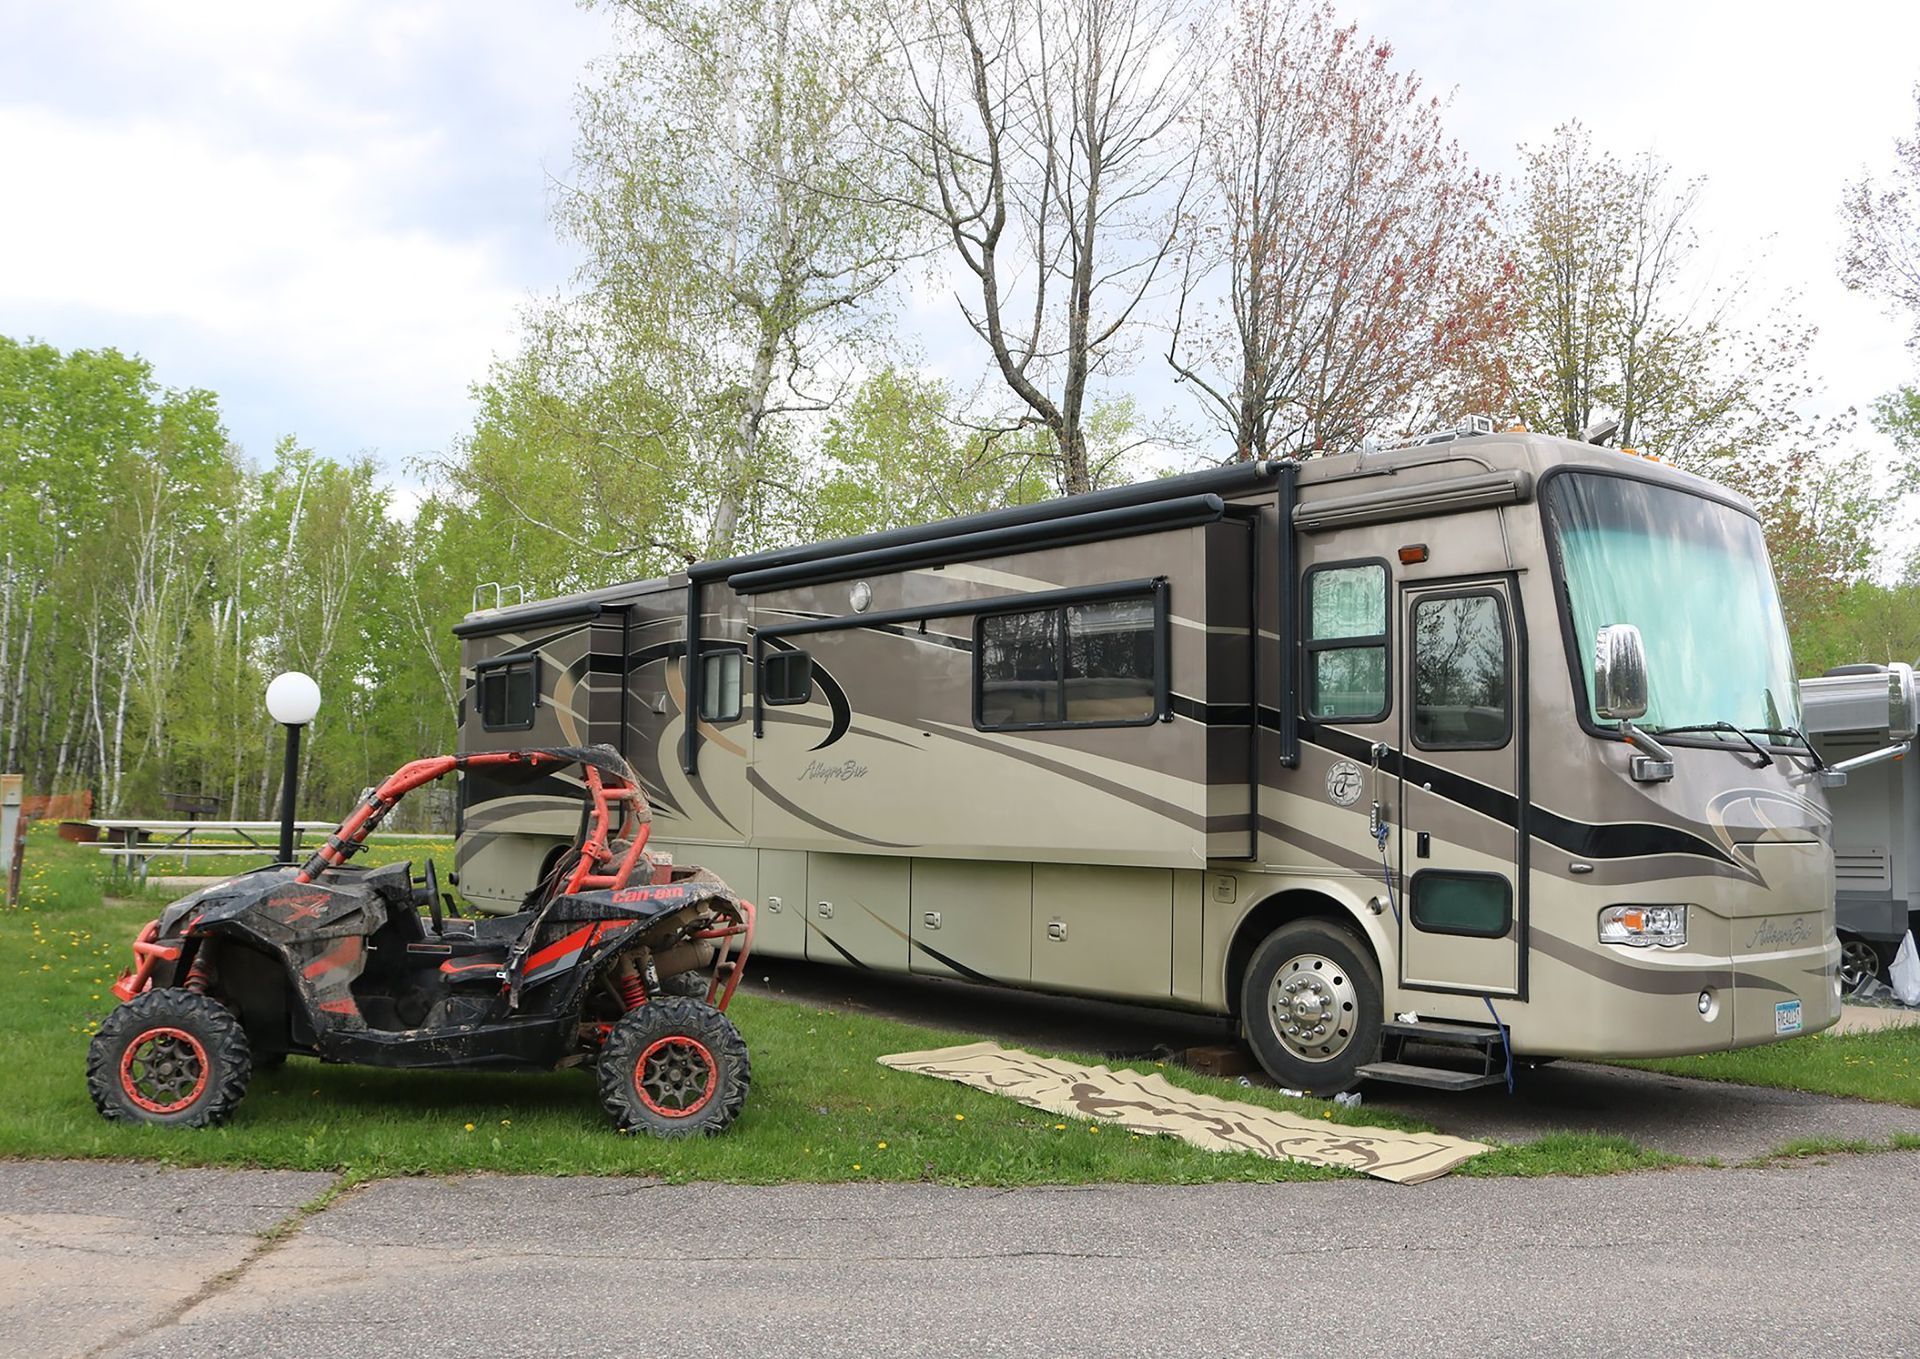 An image of recreational vehicles parked at the Trails Inn Quadna Mountain RV Campground.